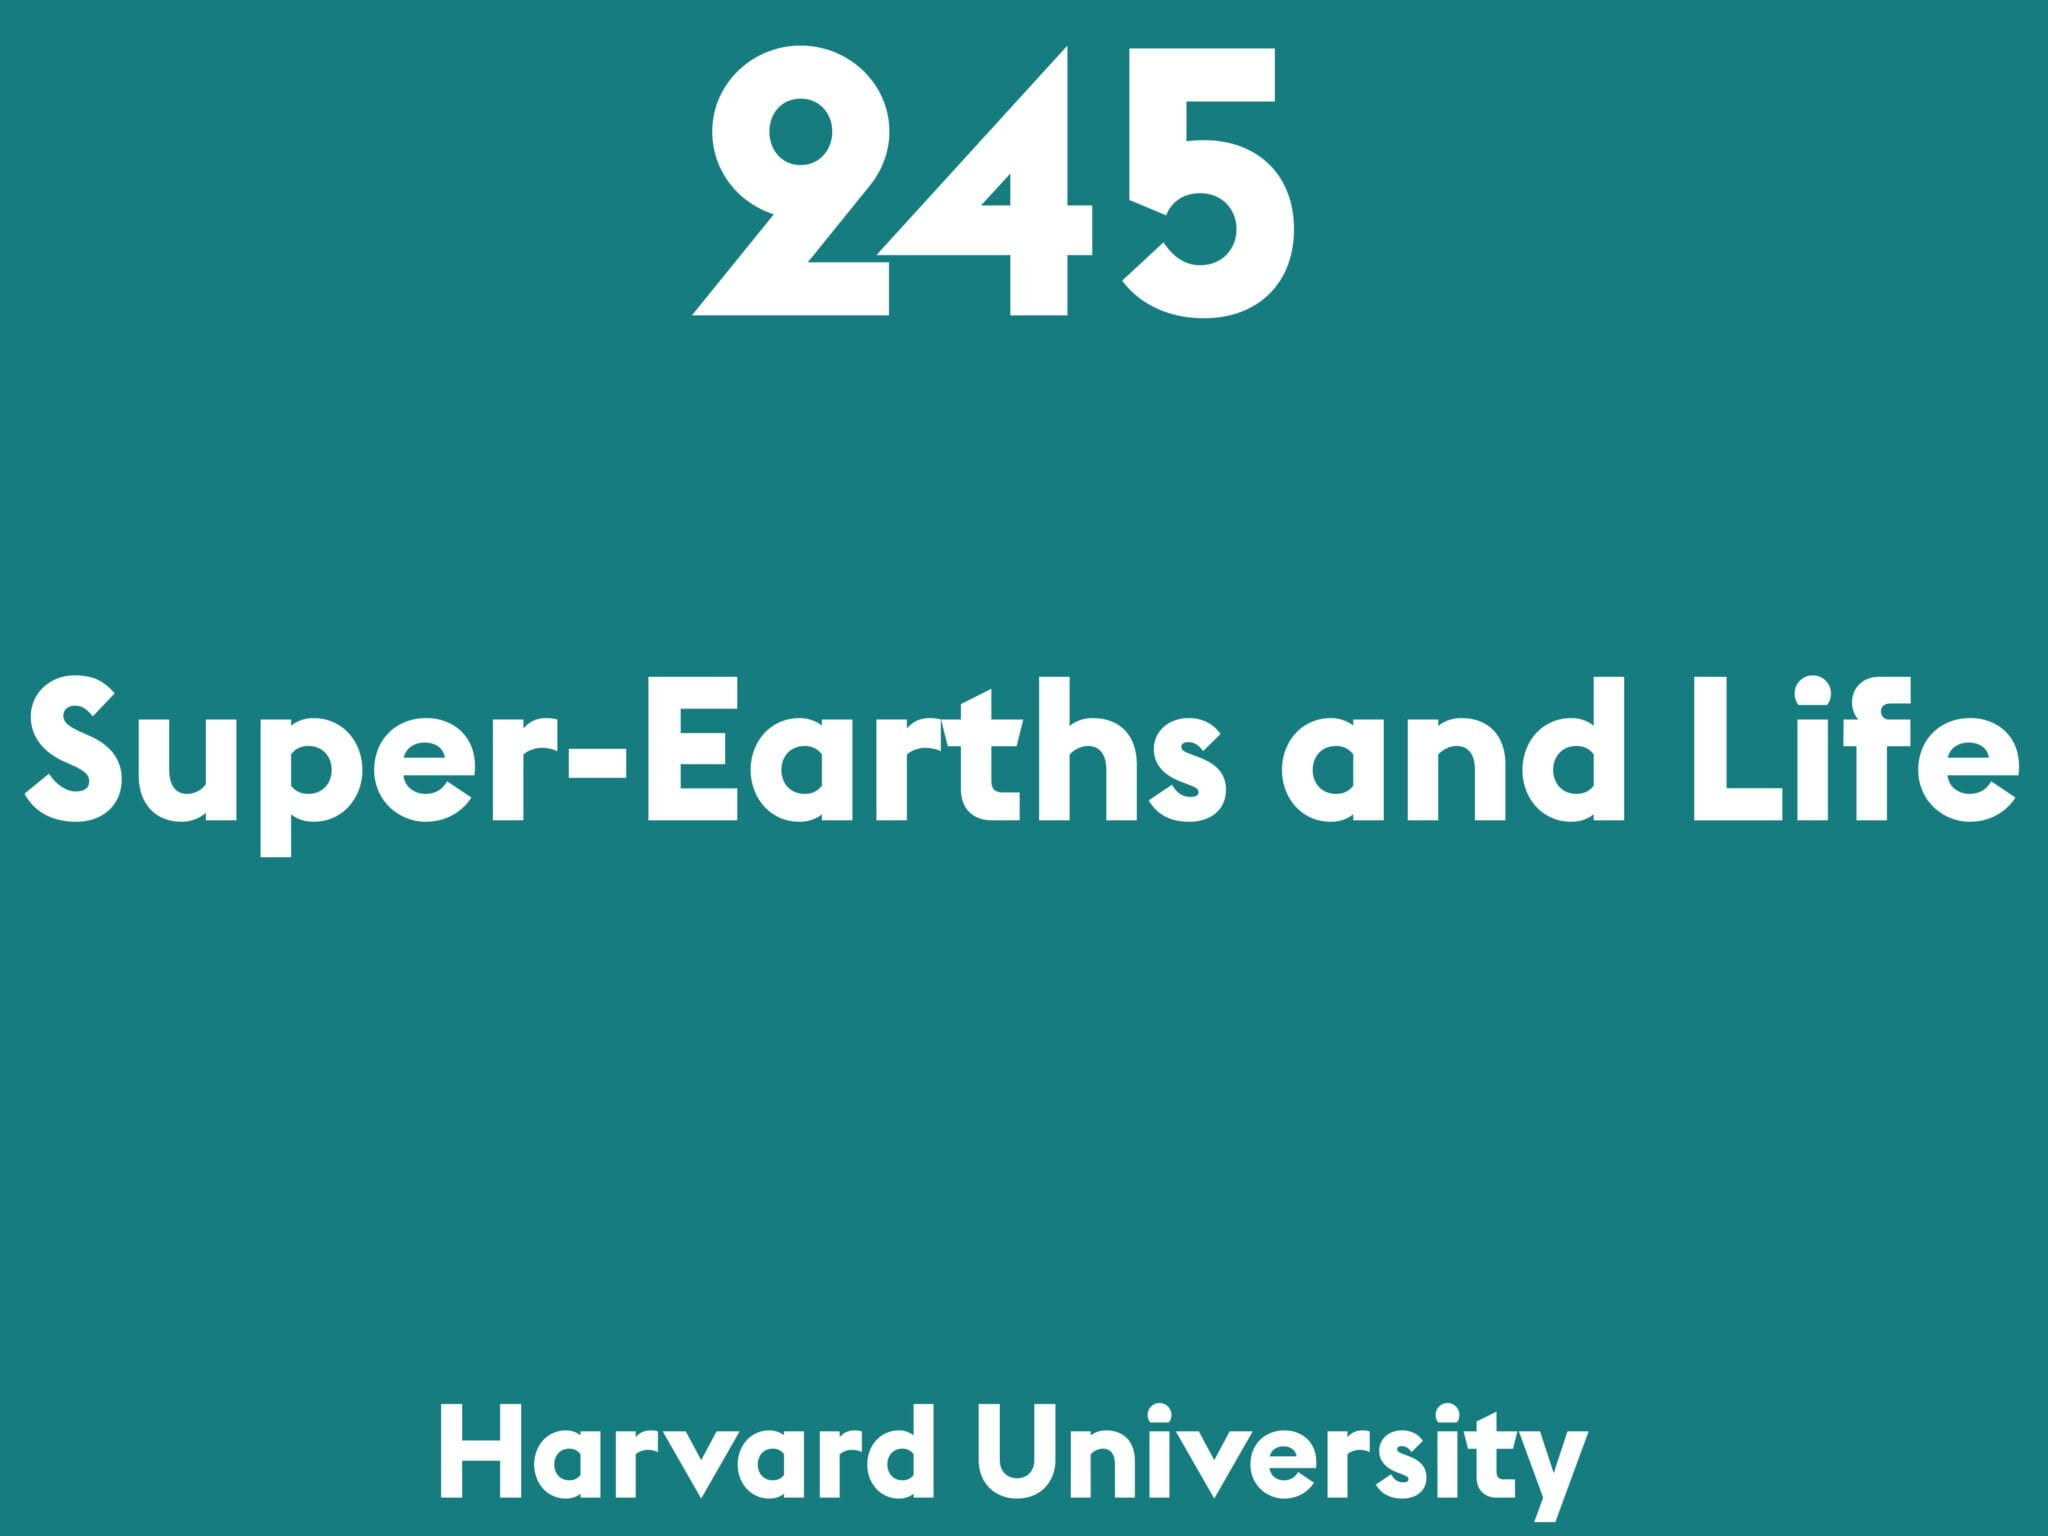 Super-Earths and Life